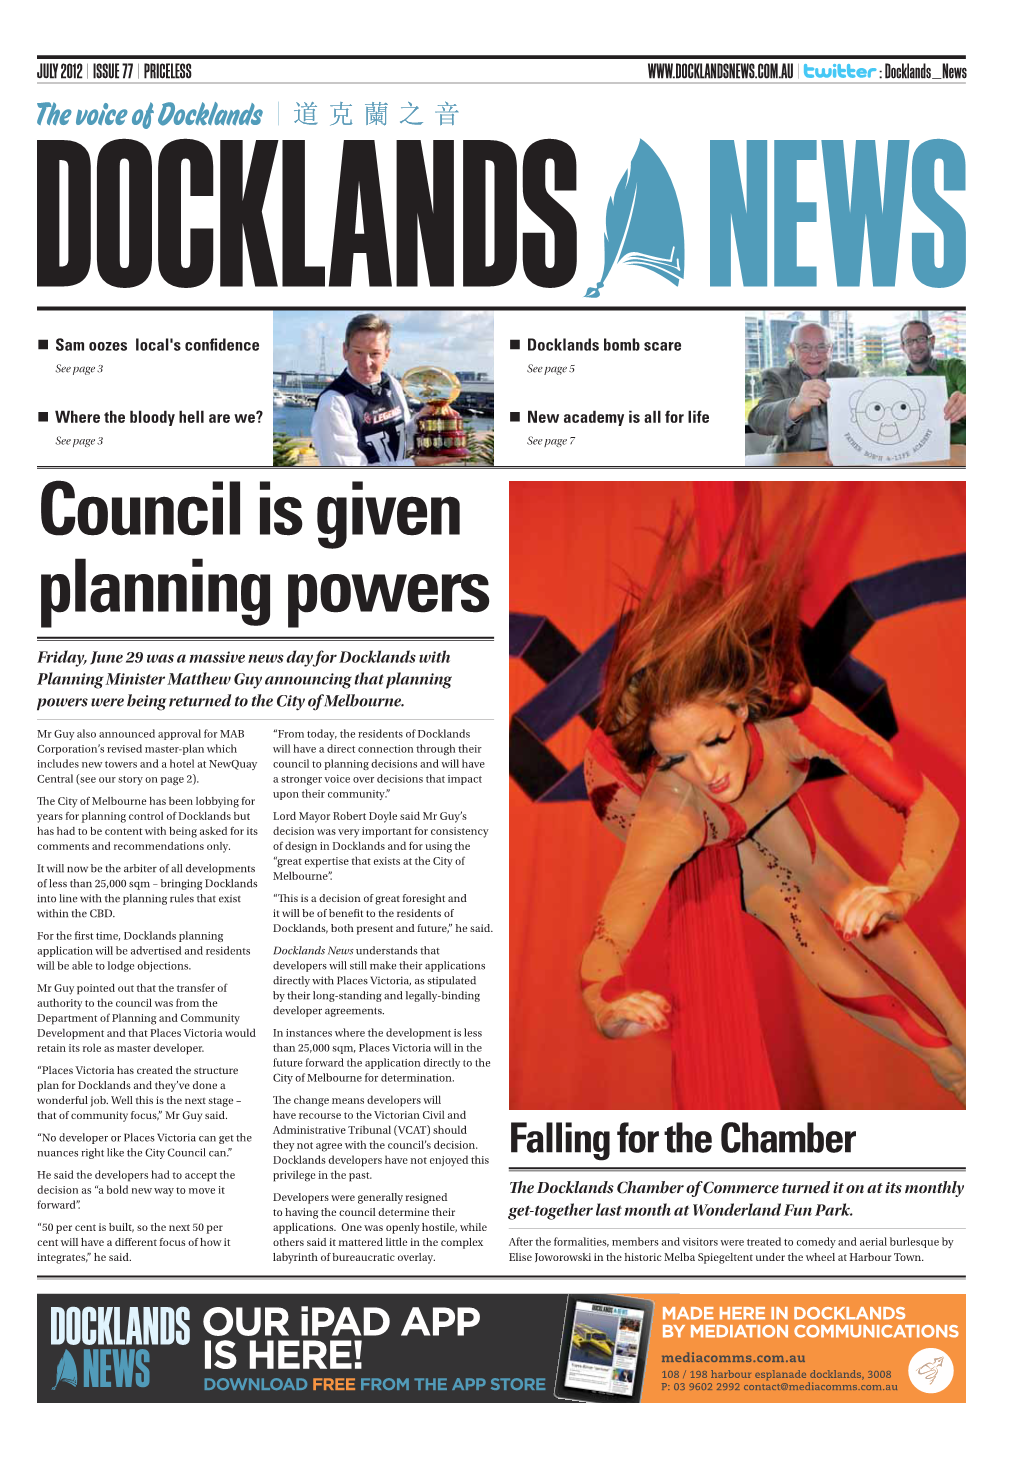 Council Is Given Planning Powers